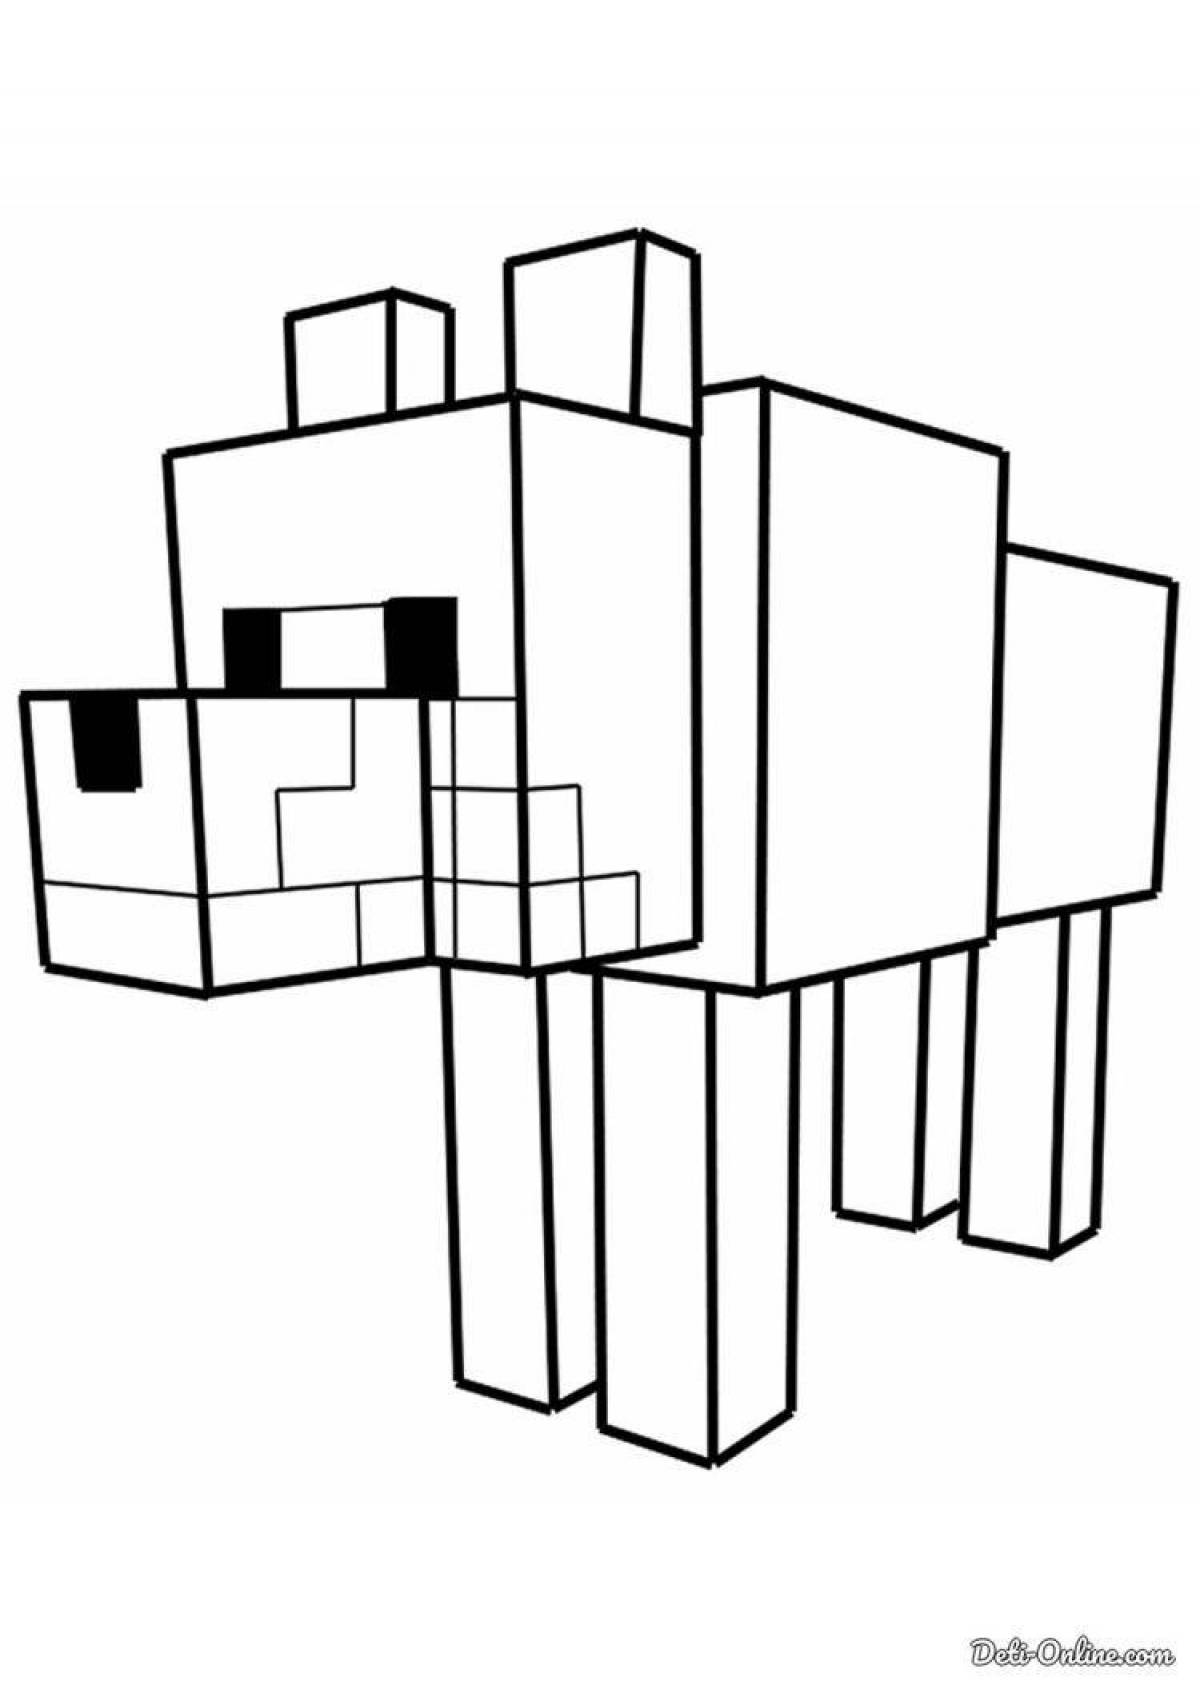 Attractive minecraft dolphin coloring page